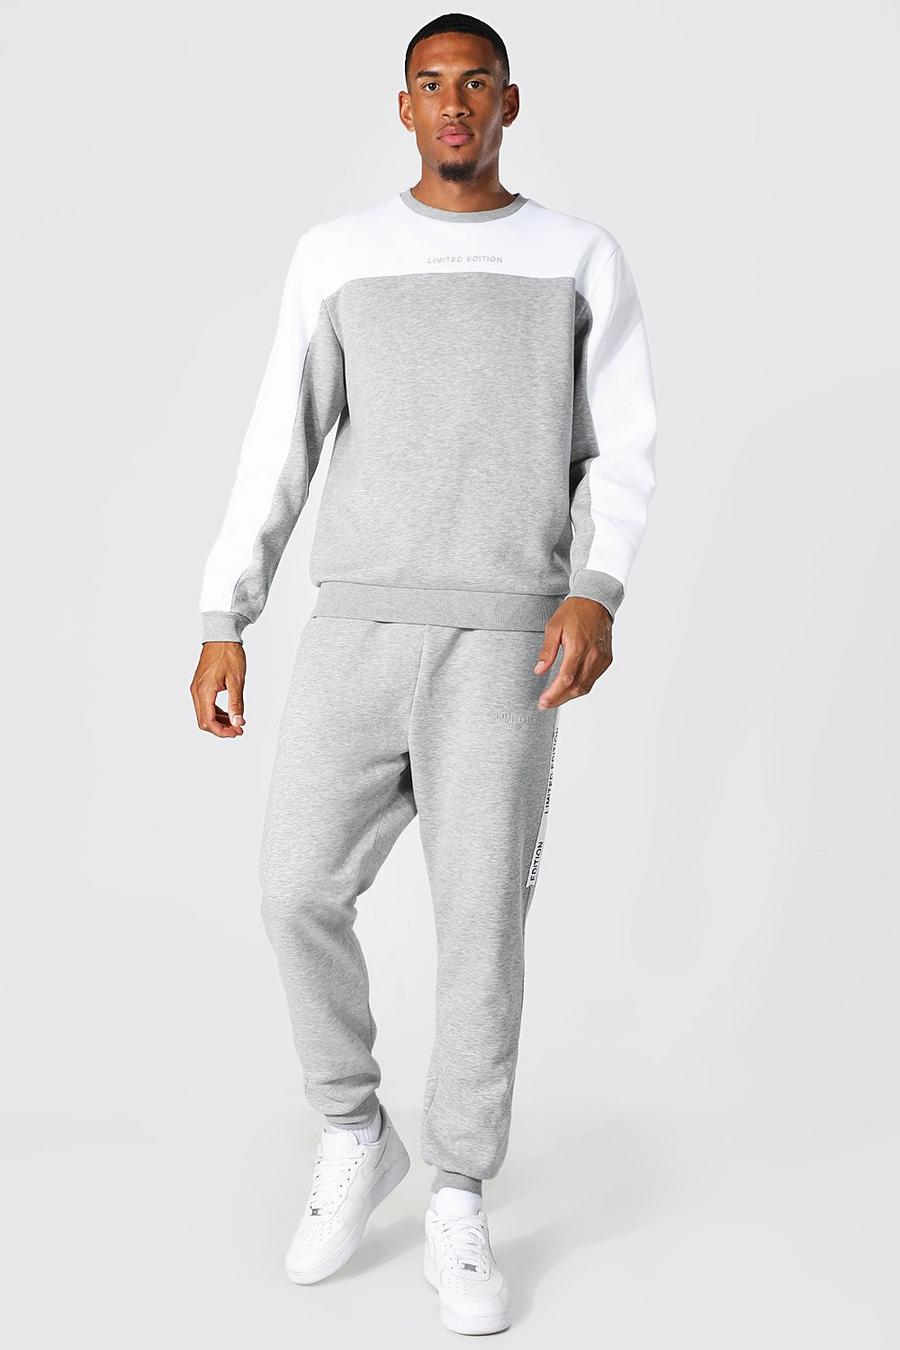 Grey marl Tall Colour Block Limited Edition Trainingspak image number 1